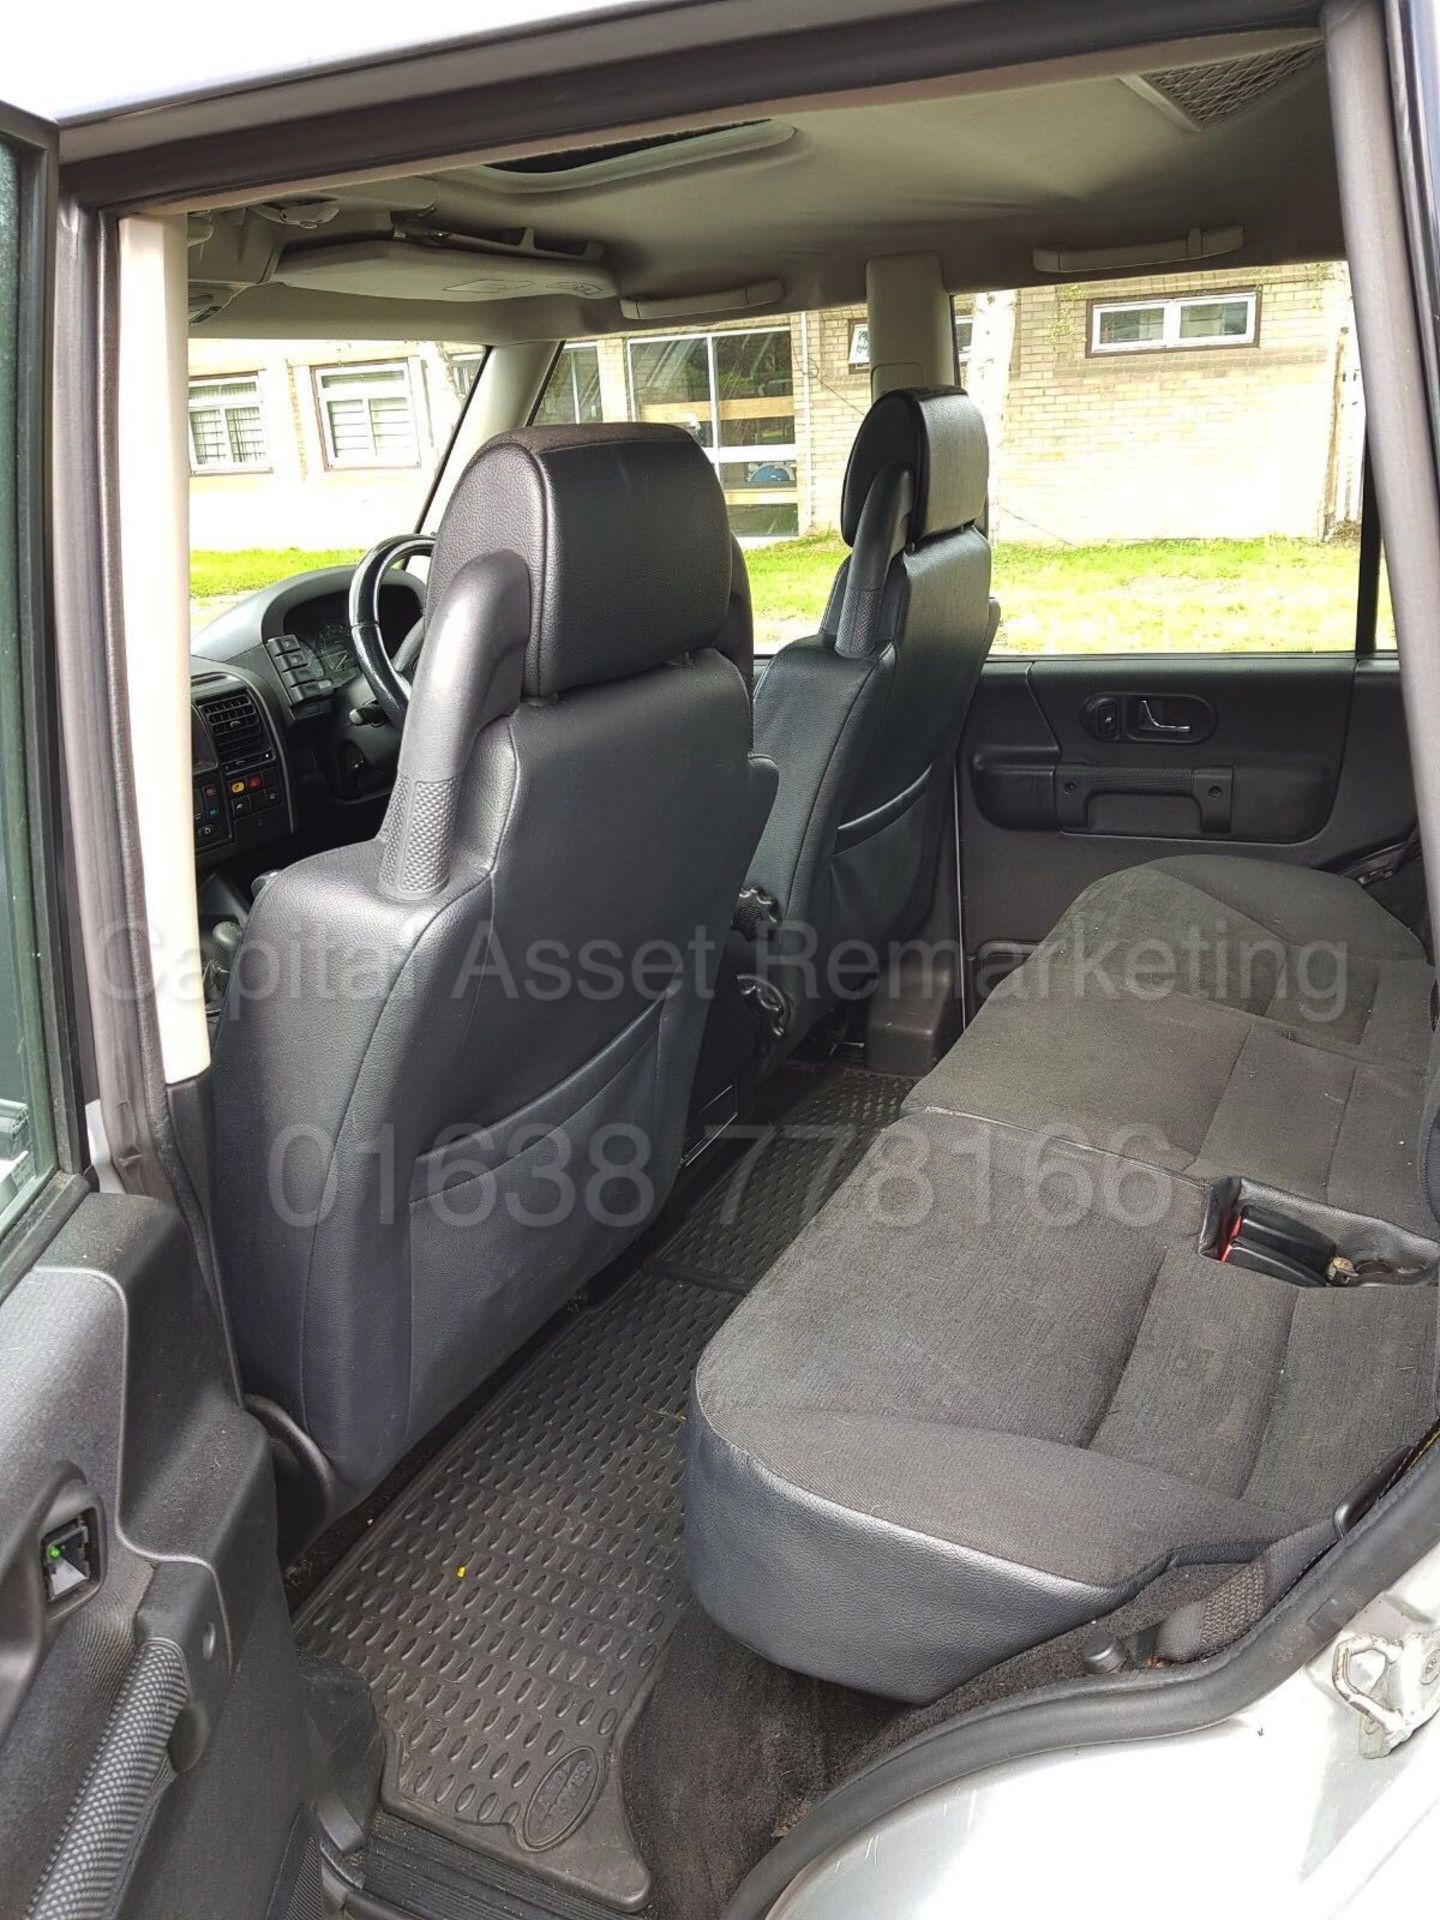 (On Sale) LAND ROVER DISCOVERY 'GS EDITION' (2004 MODEL) 'TD5 - AUTO - 7 SEATER' (NO VAT - SAVE 20%) - Image 10 of 16